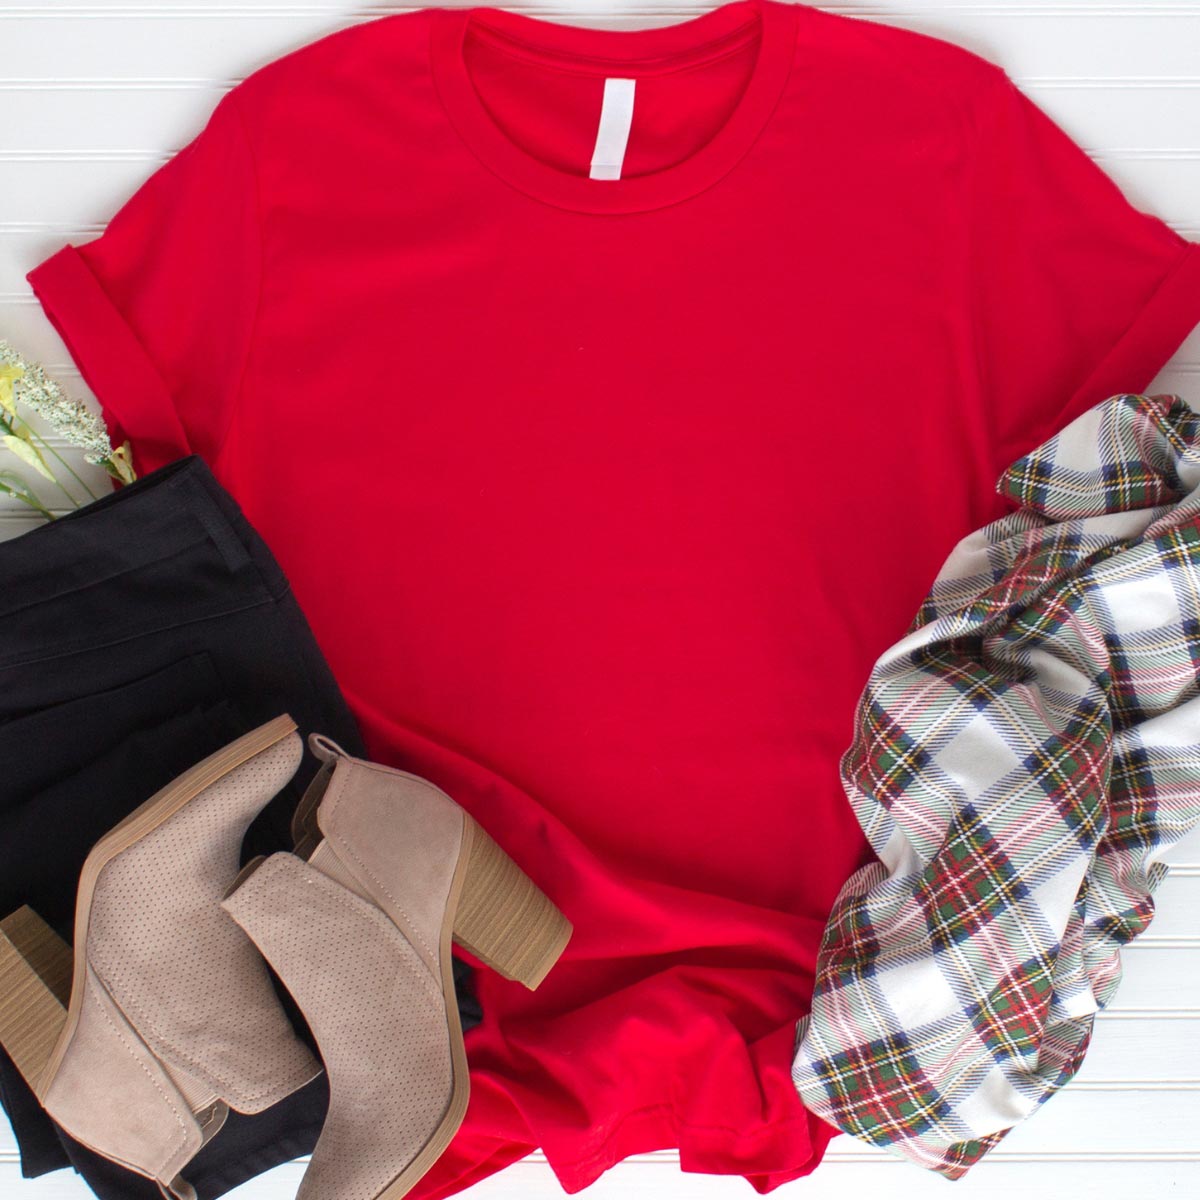 Red shirt outfit Laid Out